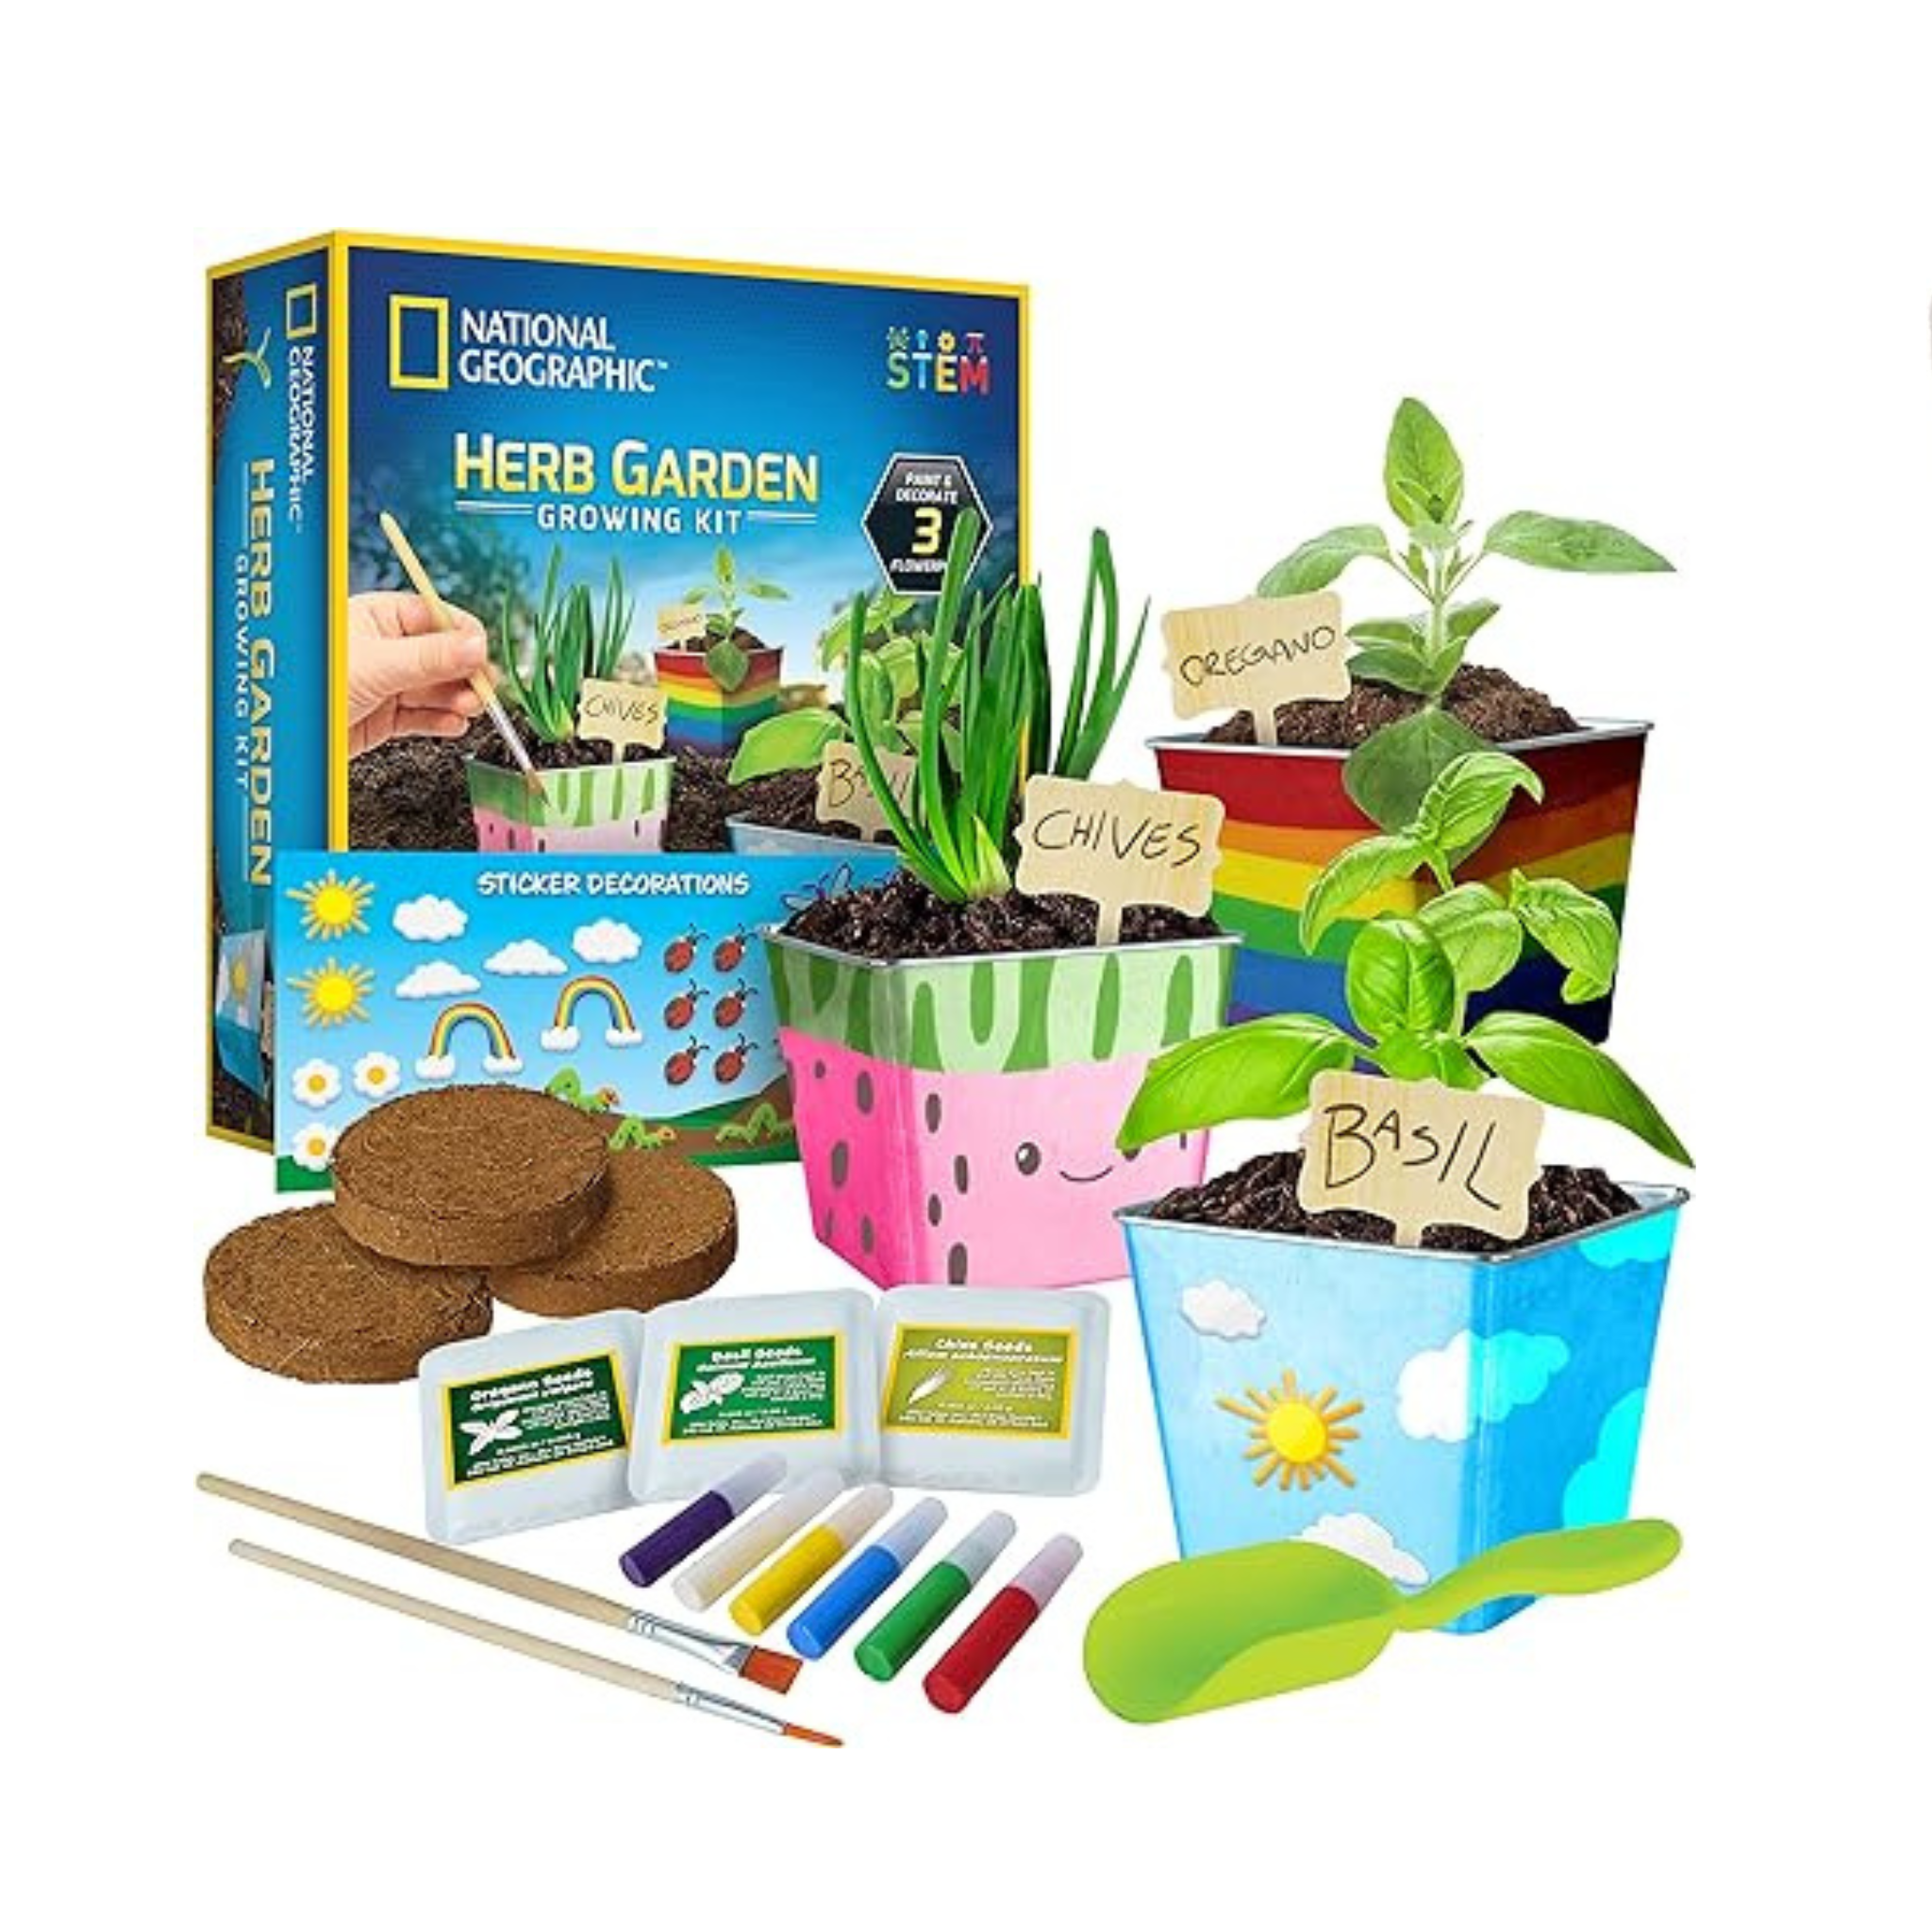 NATIONAL GEOGRAPHIC Herb Growing Kit for Kids – Decorate 3 Pots